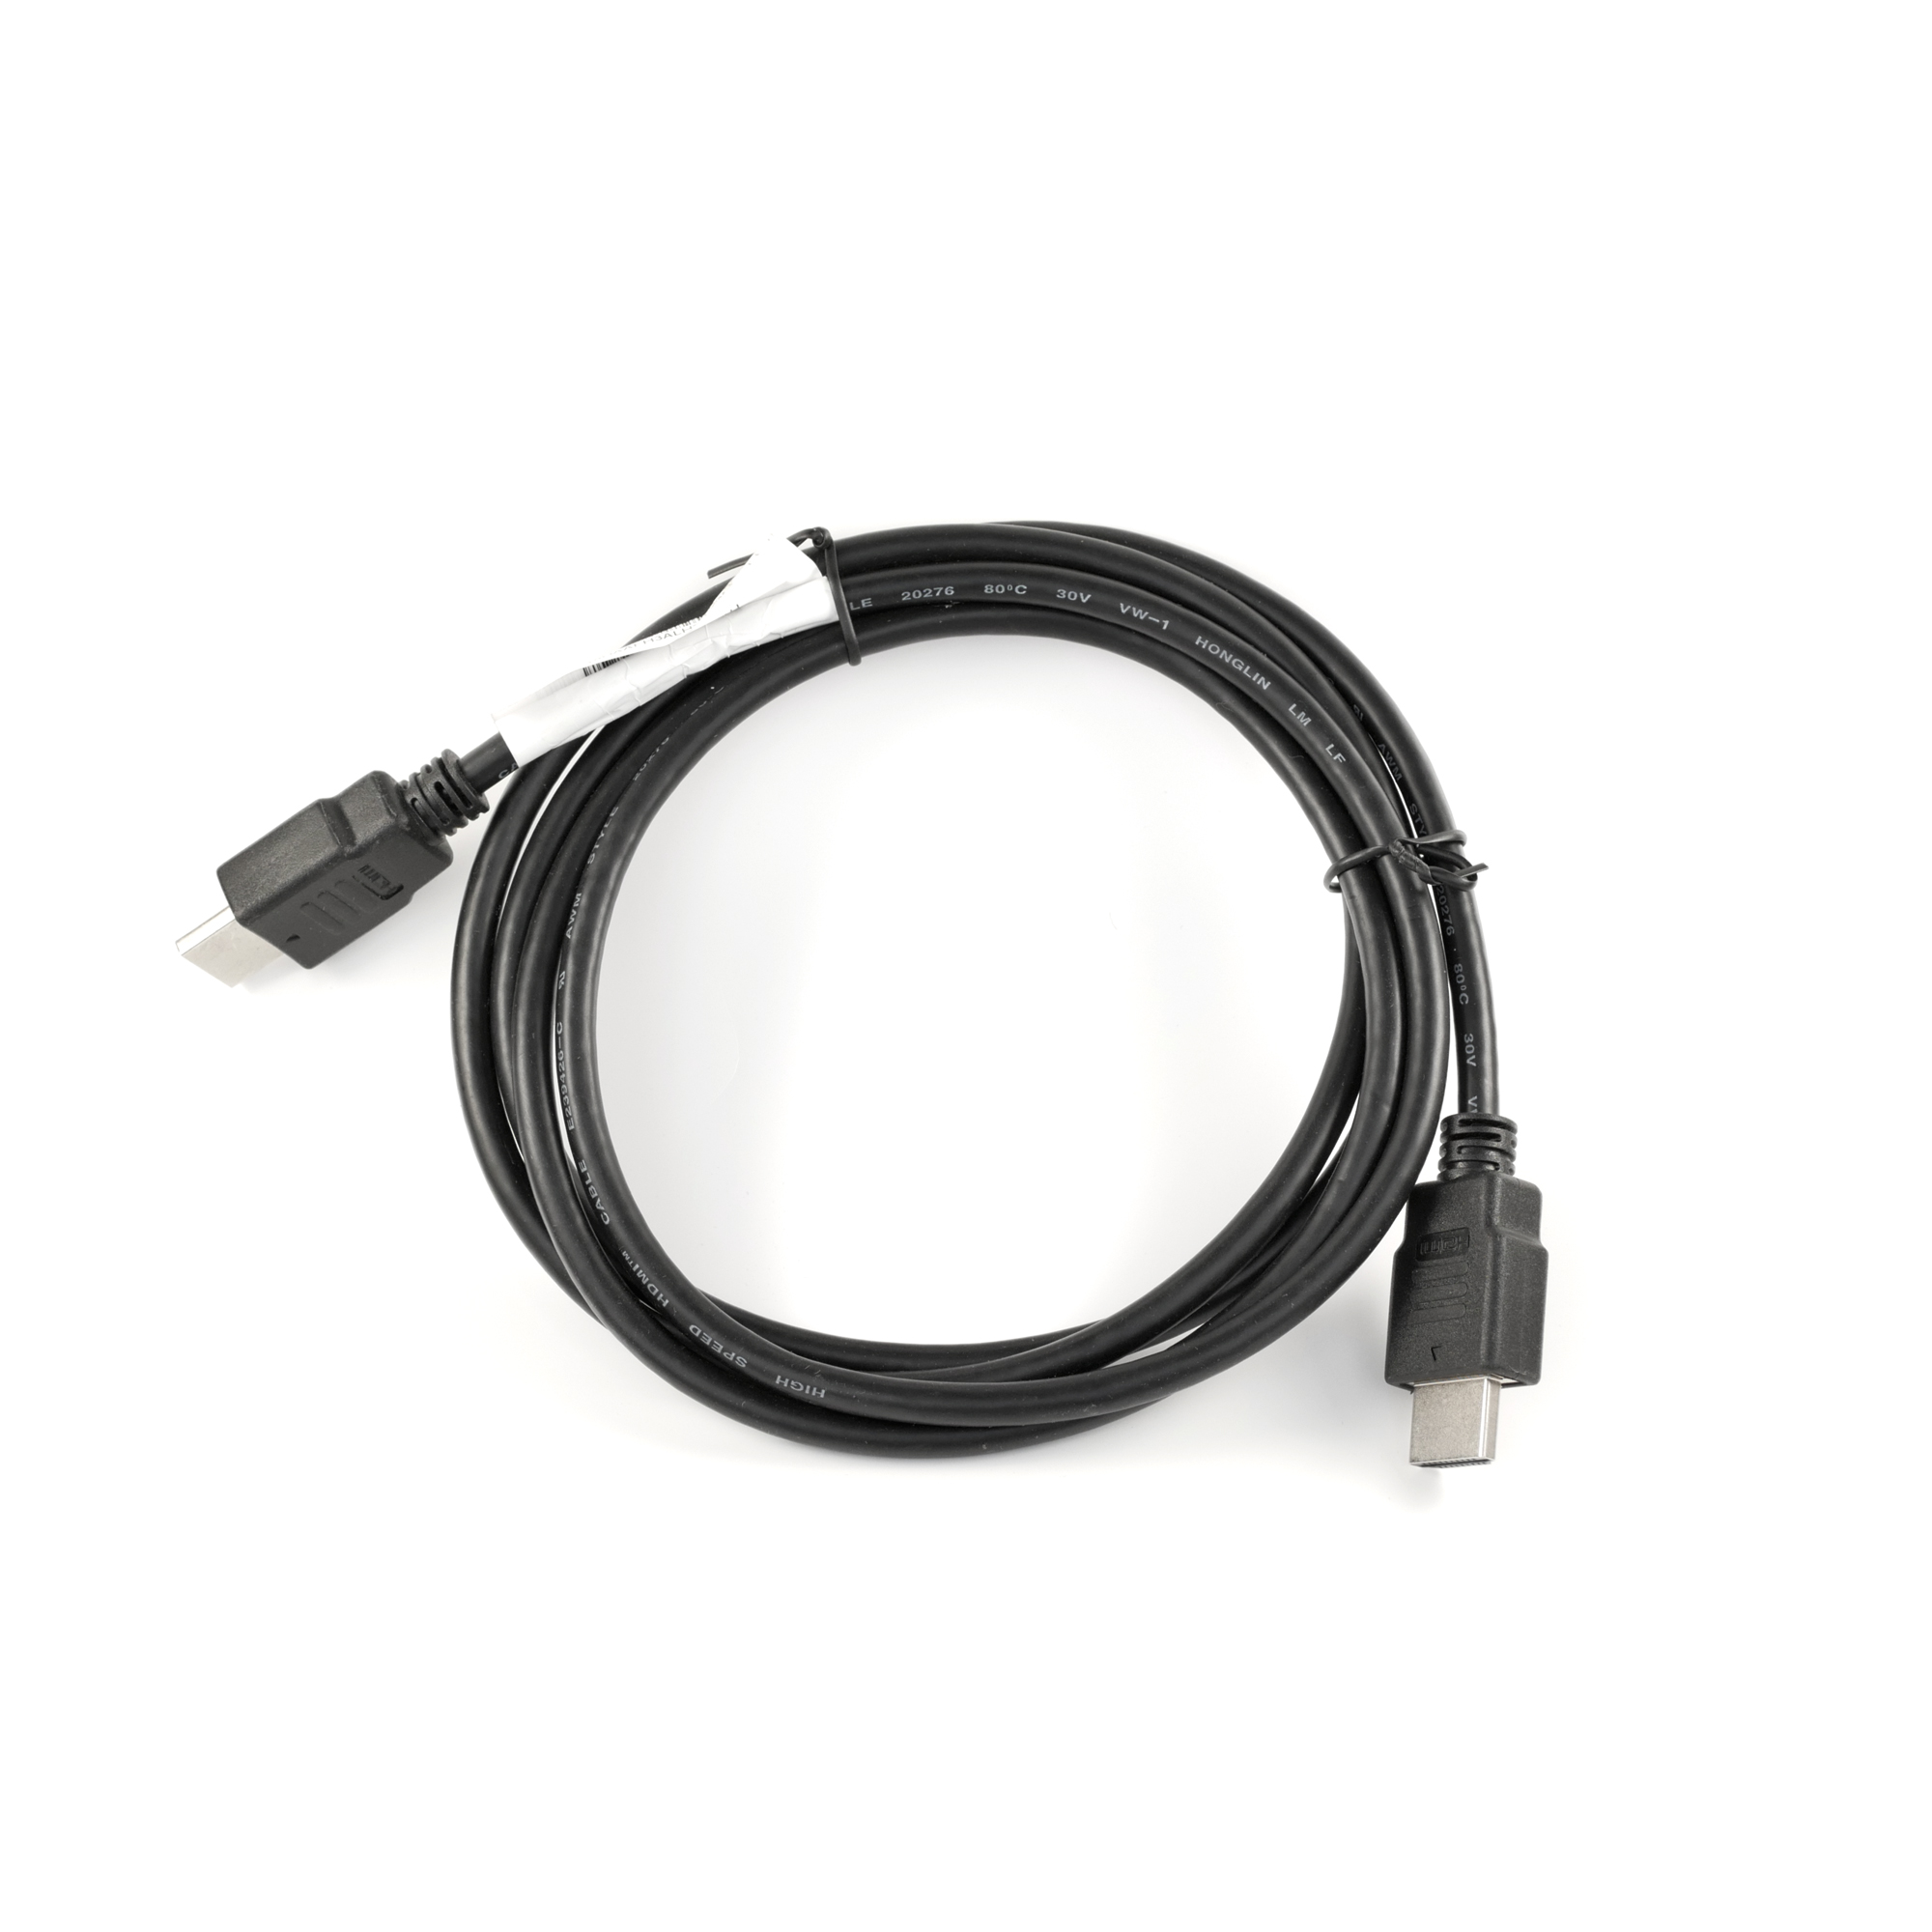 HP HDMI to HDMI Cable 6ft (1.8m) 917445-001 917445-012 [917445-001; 917445-002; 917445-0] - $19.00 : Professional Multi Monitor Workstations, Card Experts